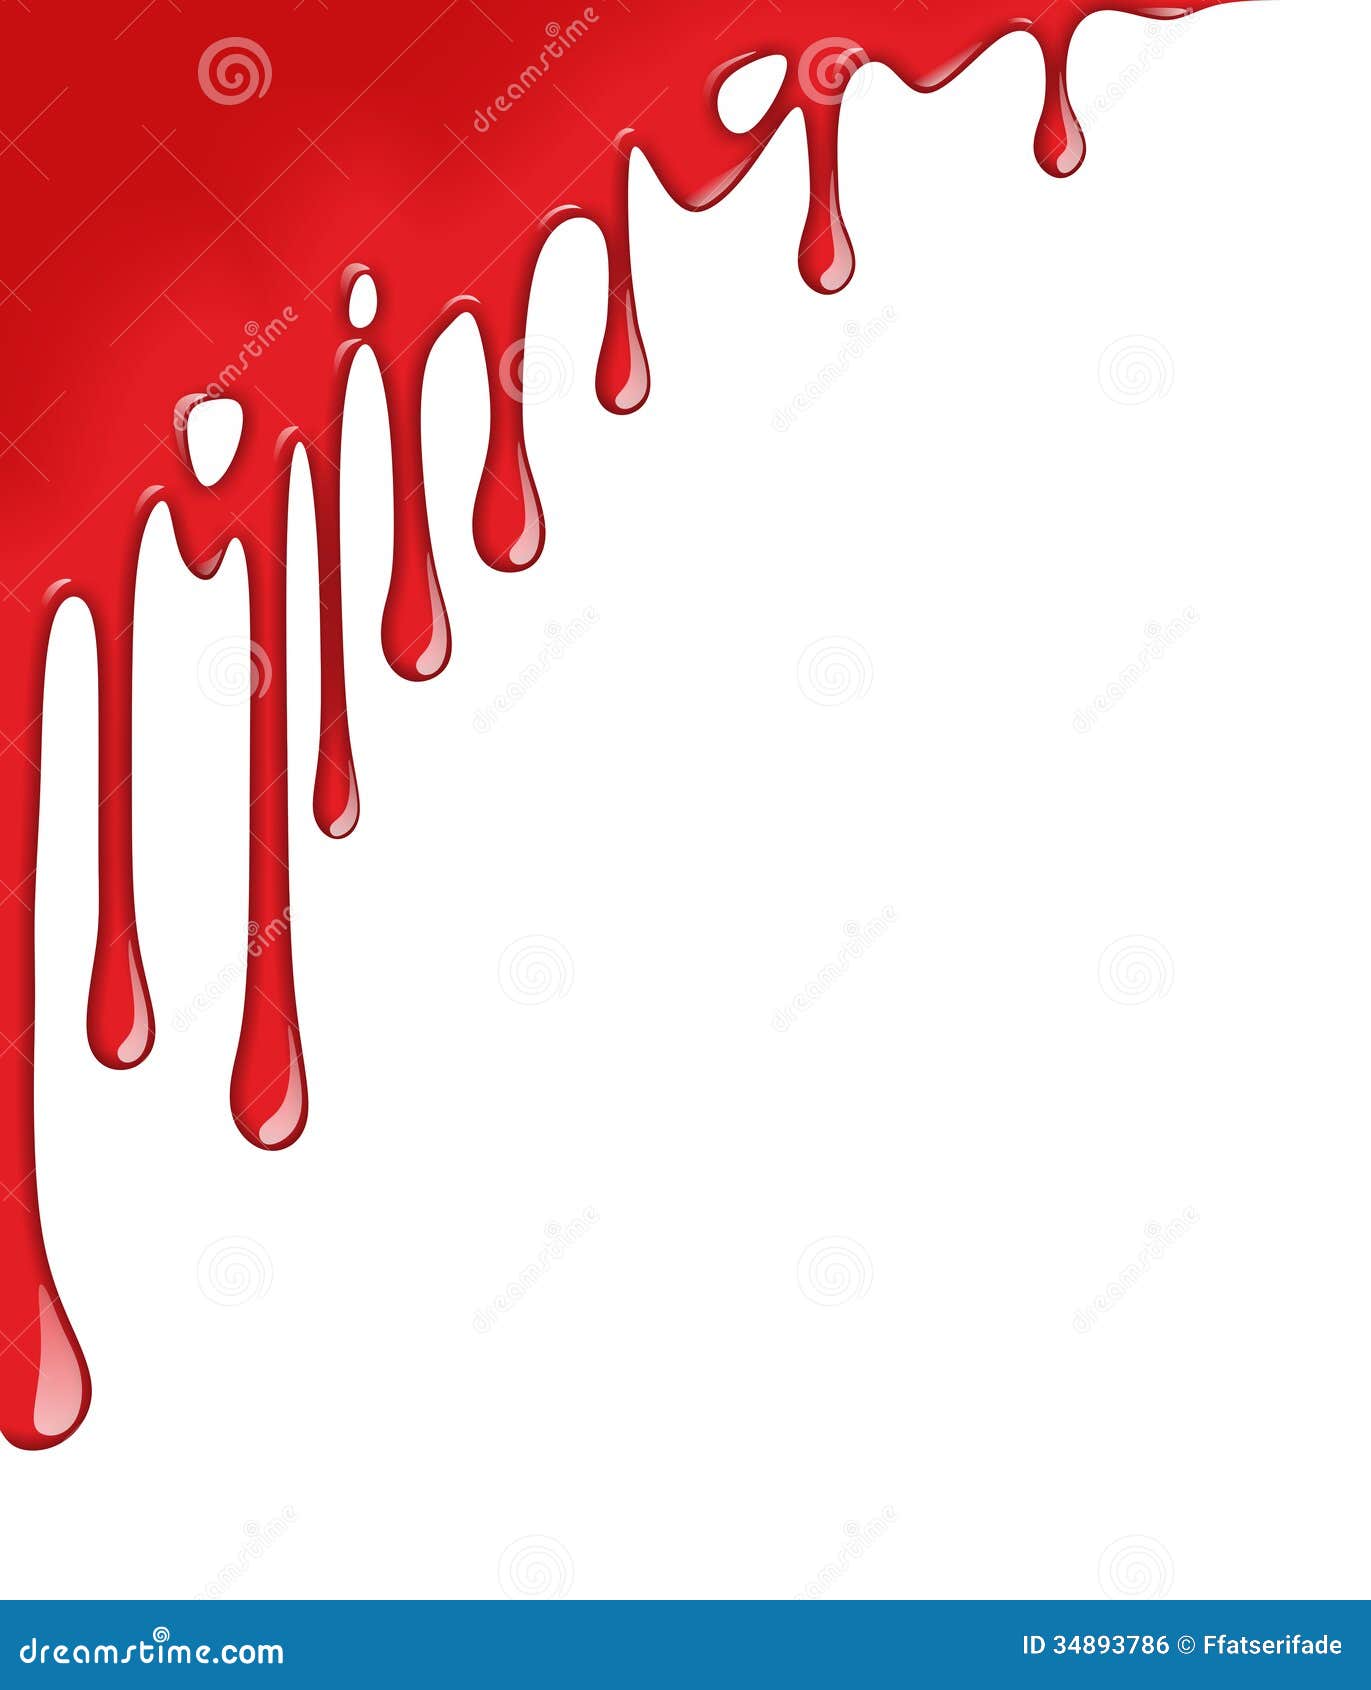 clipart of blood dripping - photo #19